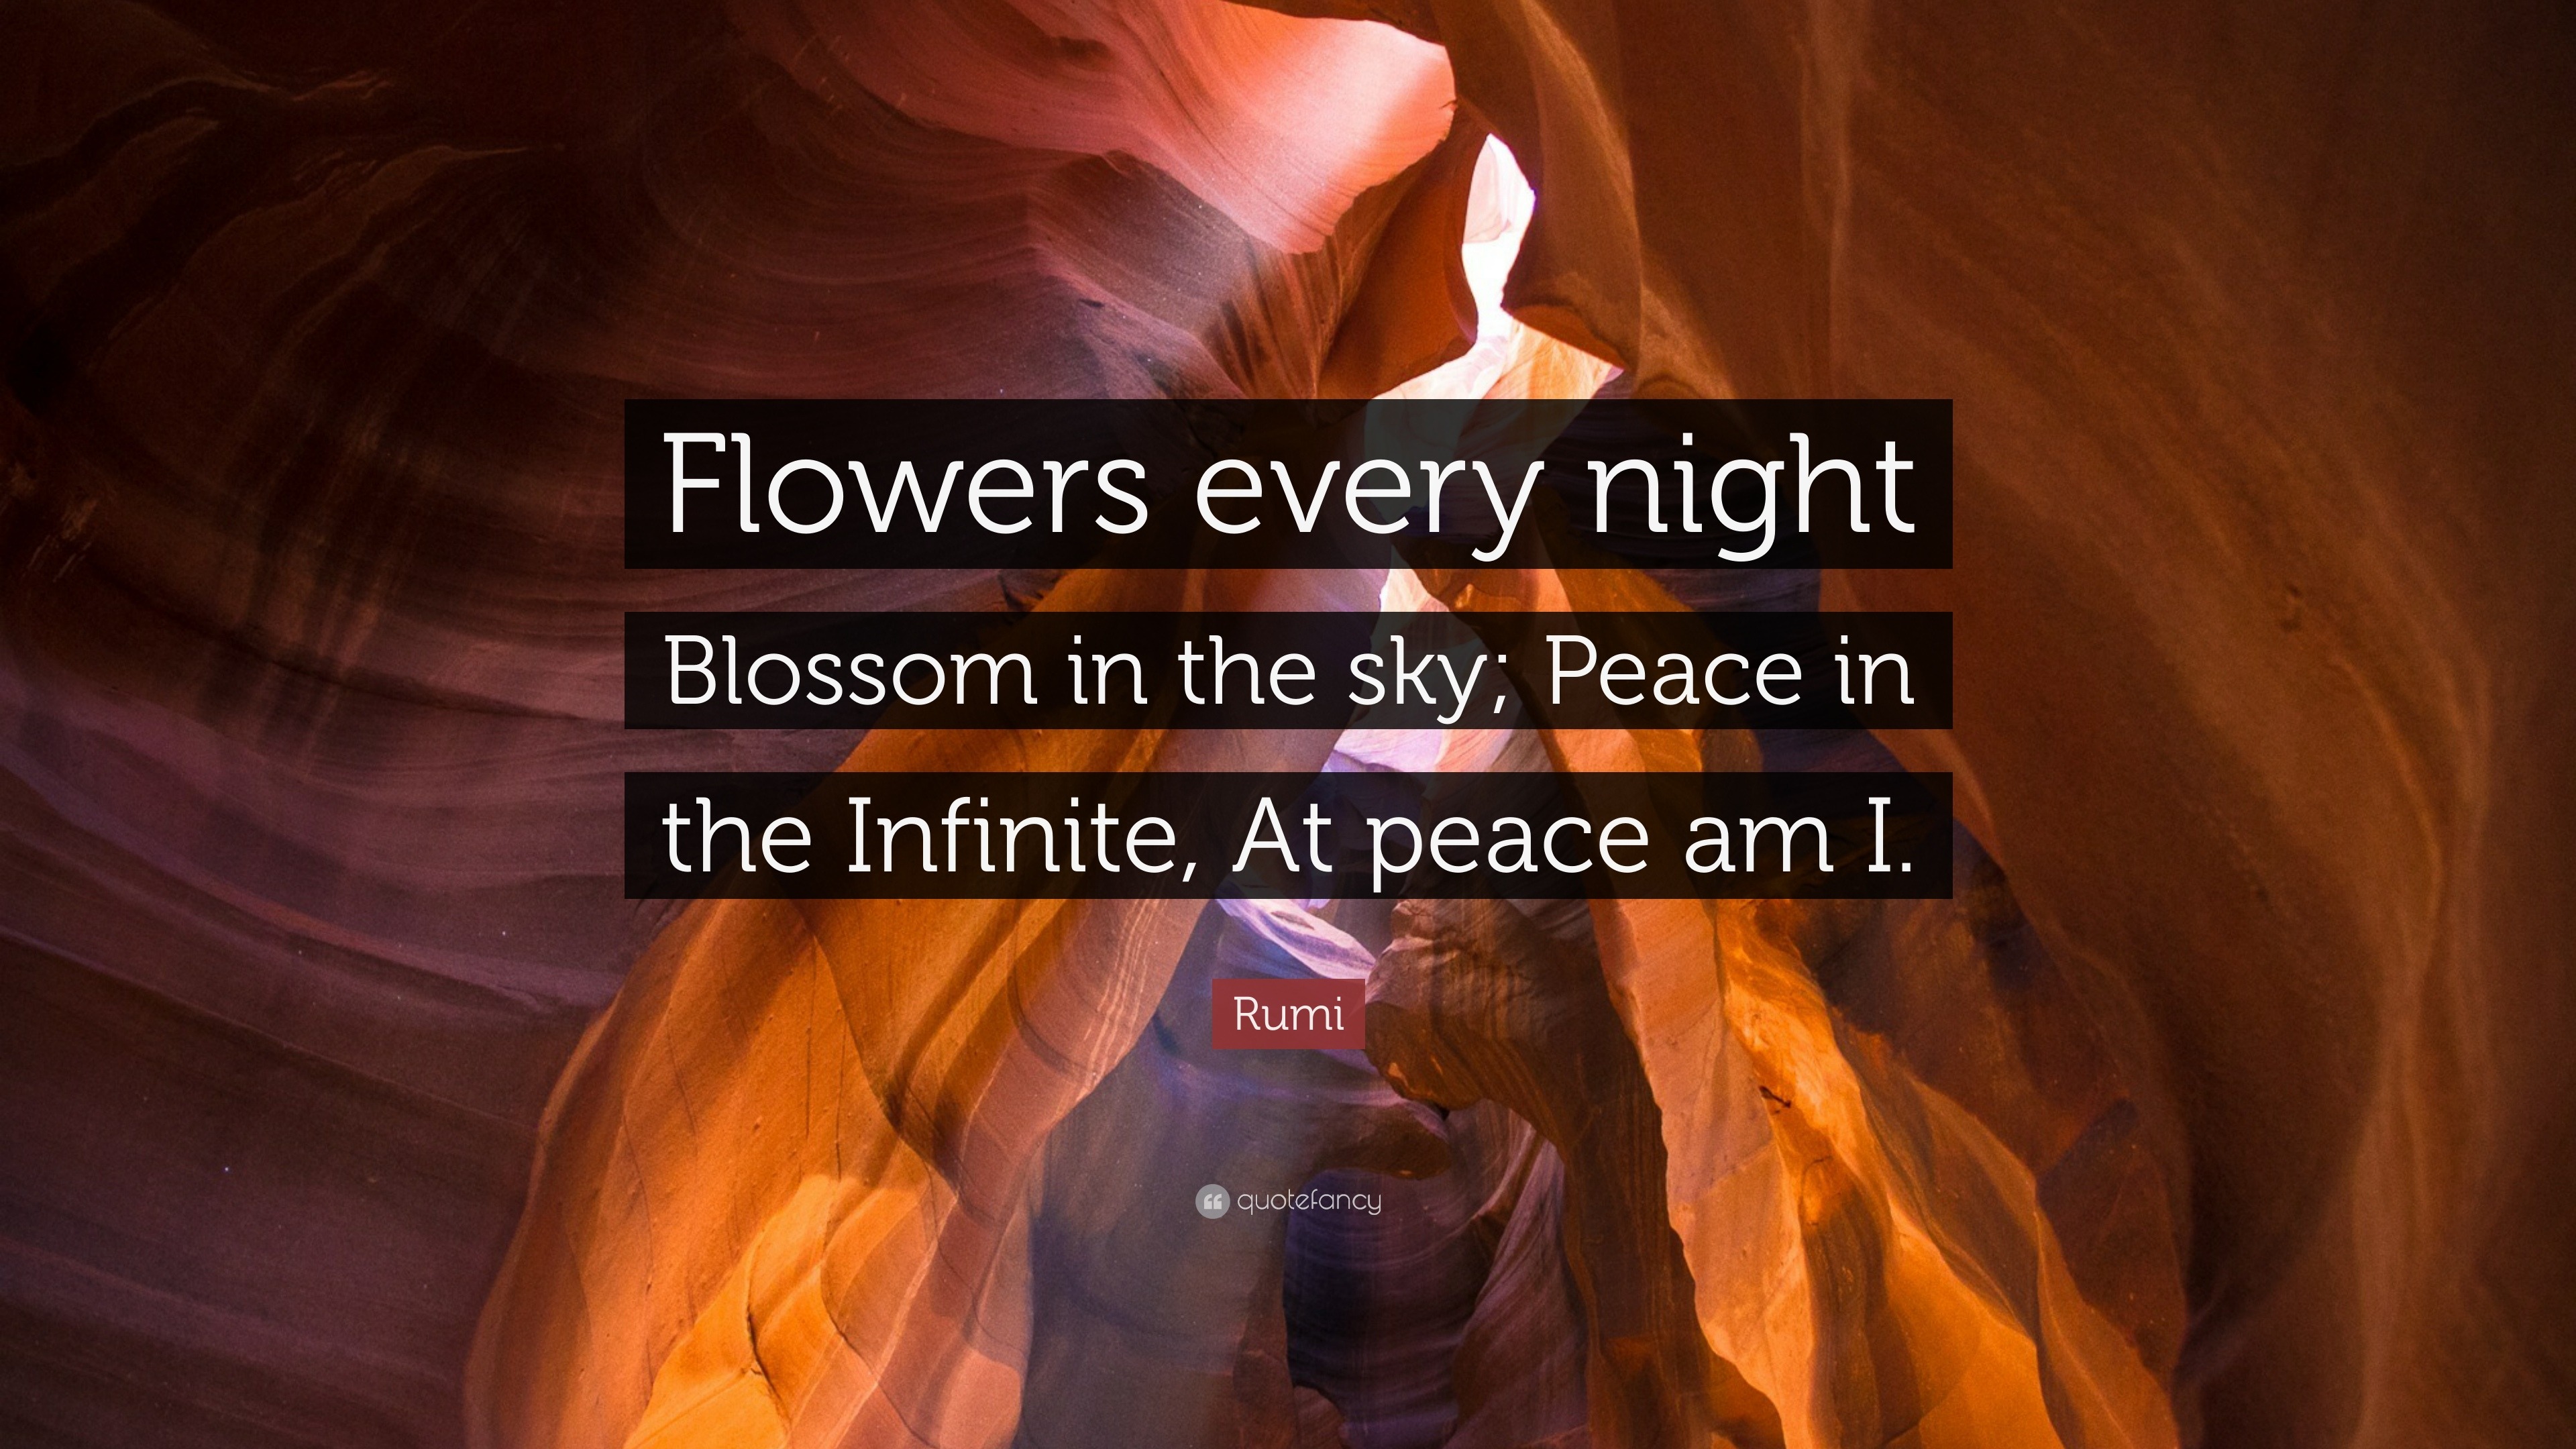 Rumi Quote “Flowers every night Blossom in the sky; Peace